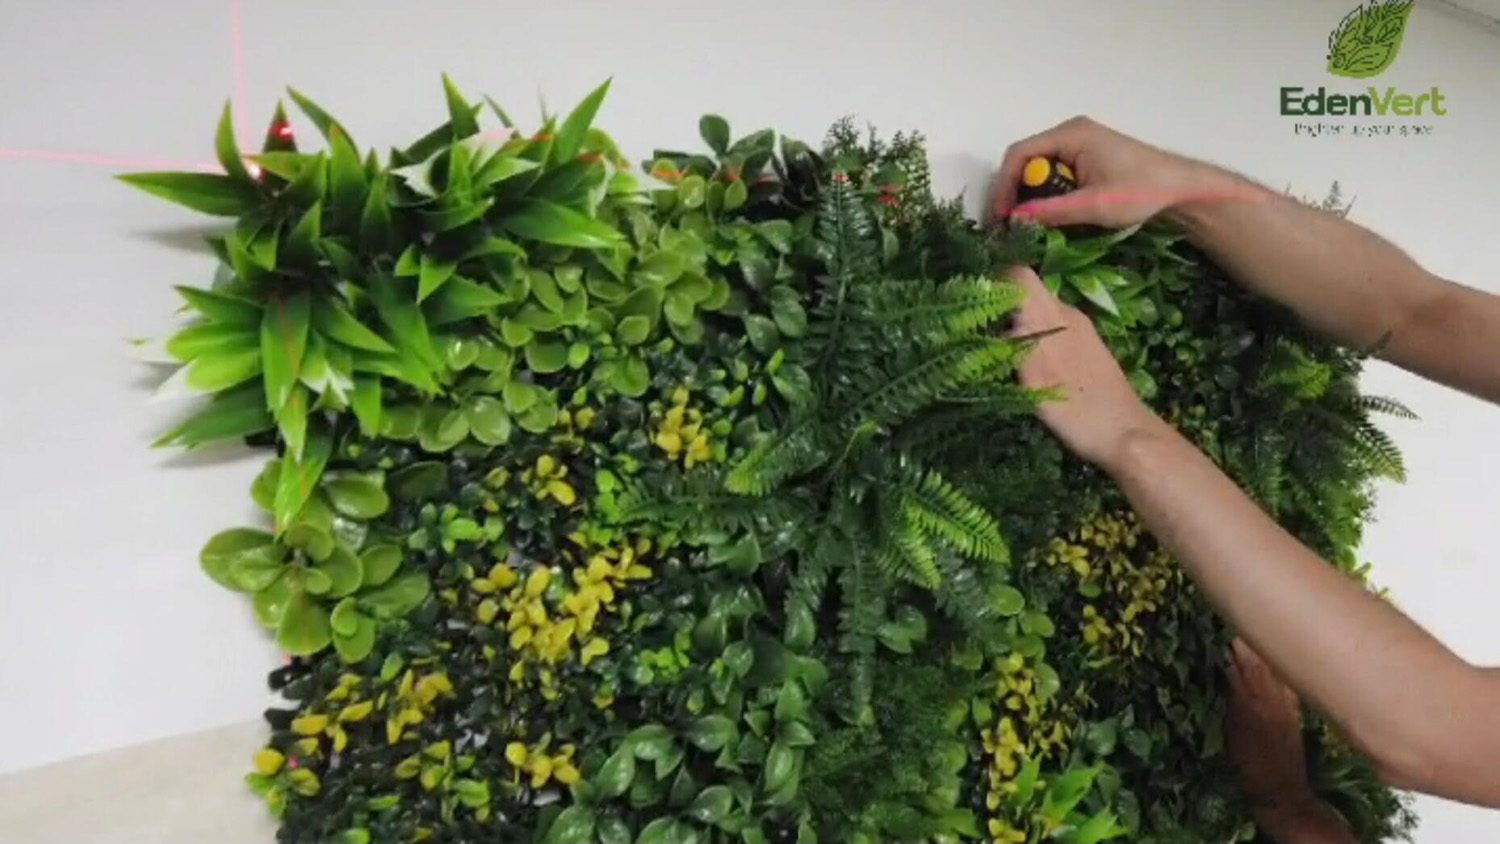 install arificial green wall for interior decoration Video